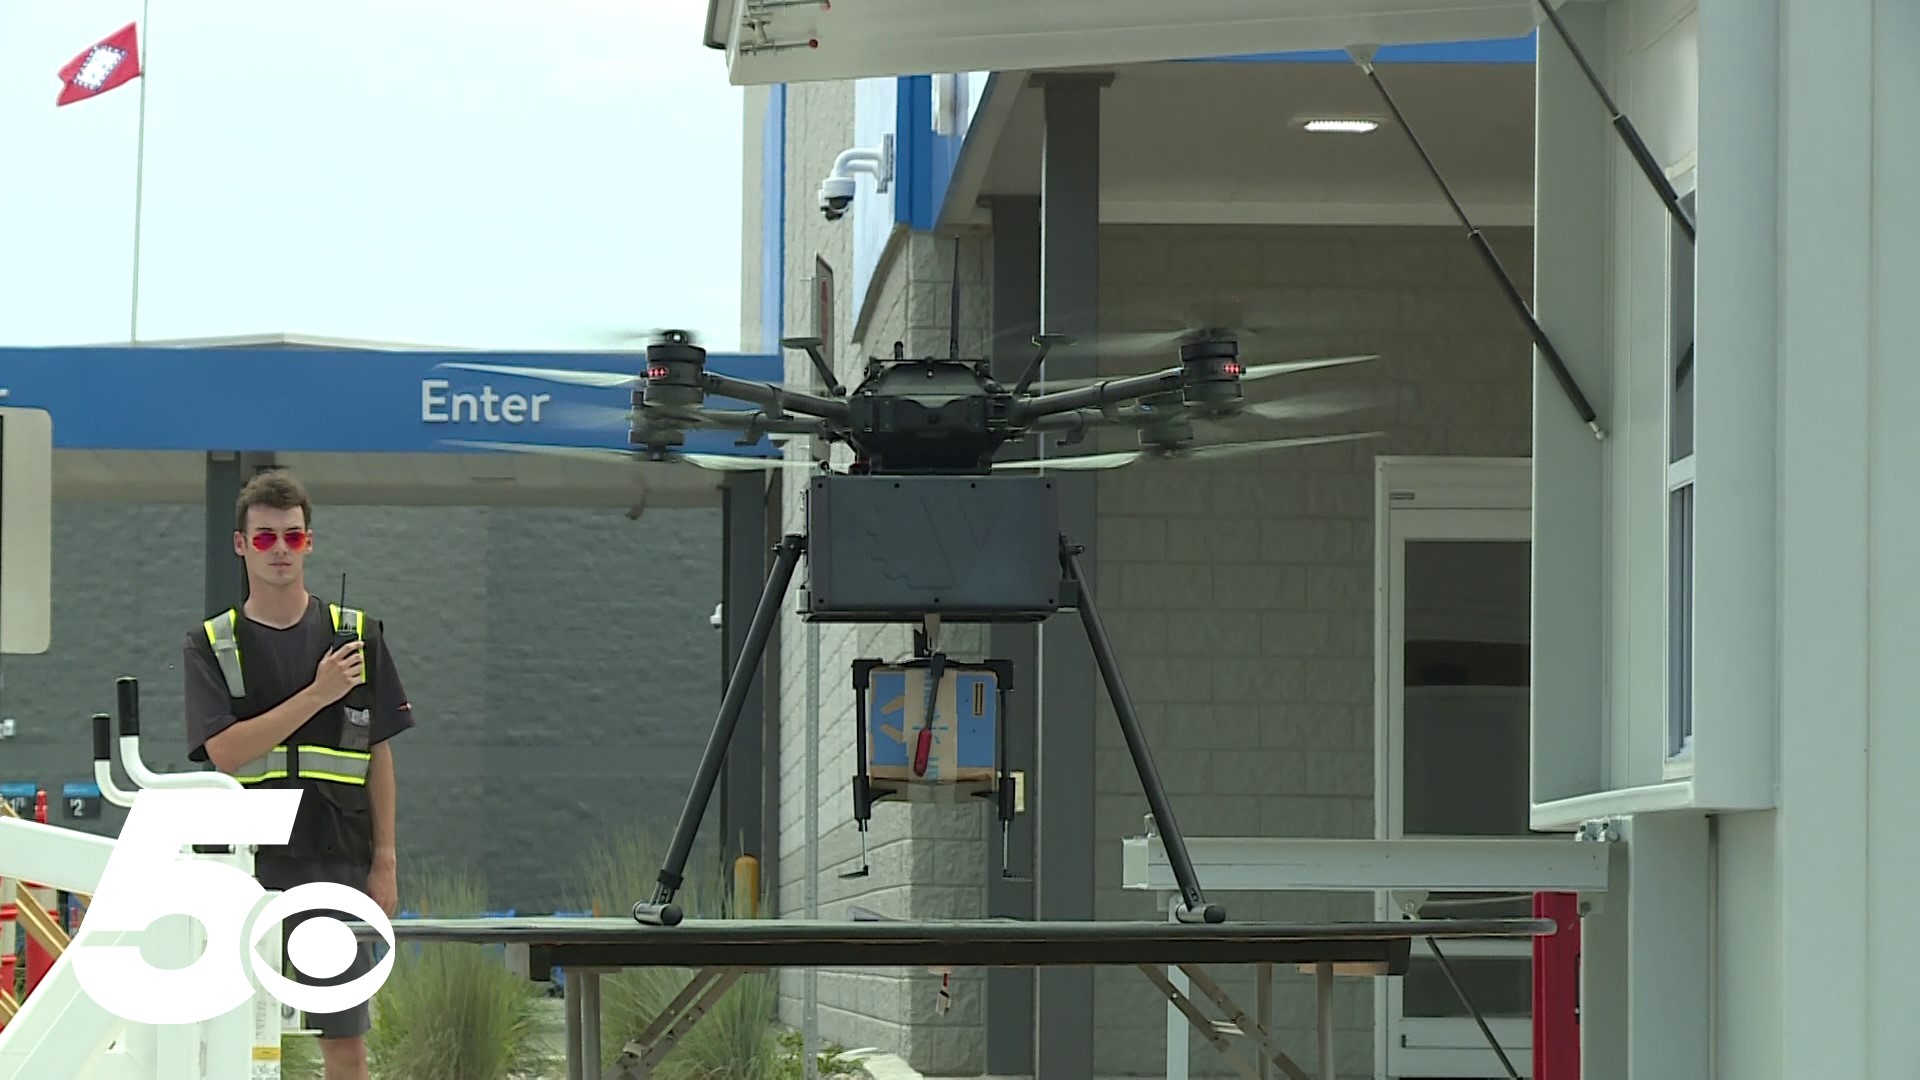 The Walmart DroneUp program has delivery hubs at stores in Bentonville, Rogers and Farmington, all allowing the company to deliver within 30 minutes for four dollars